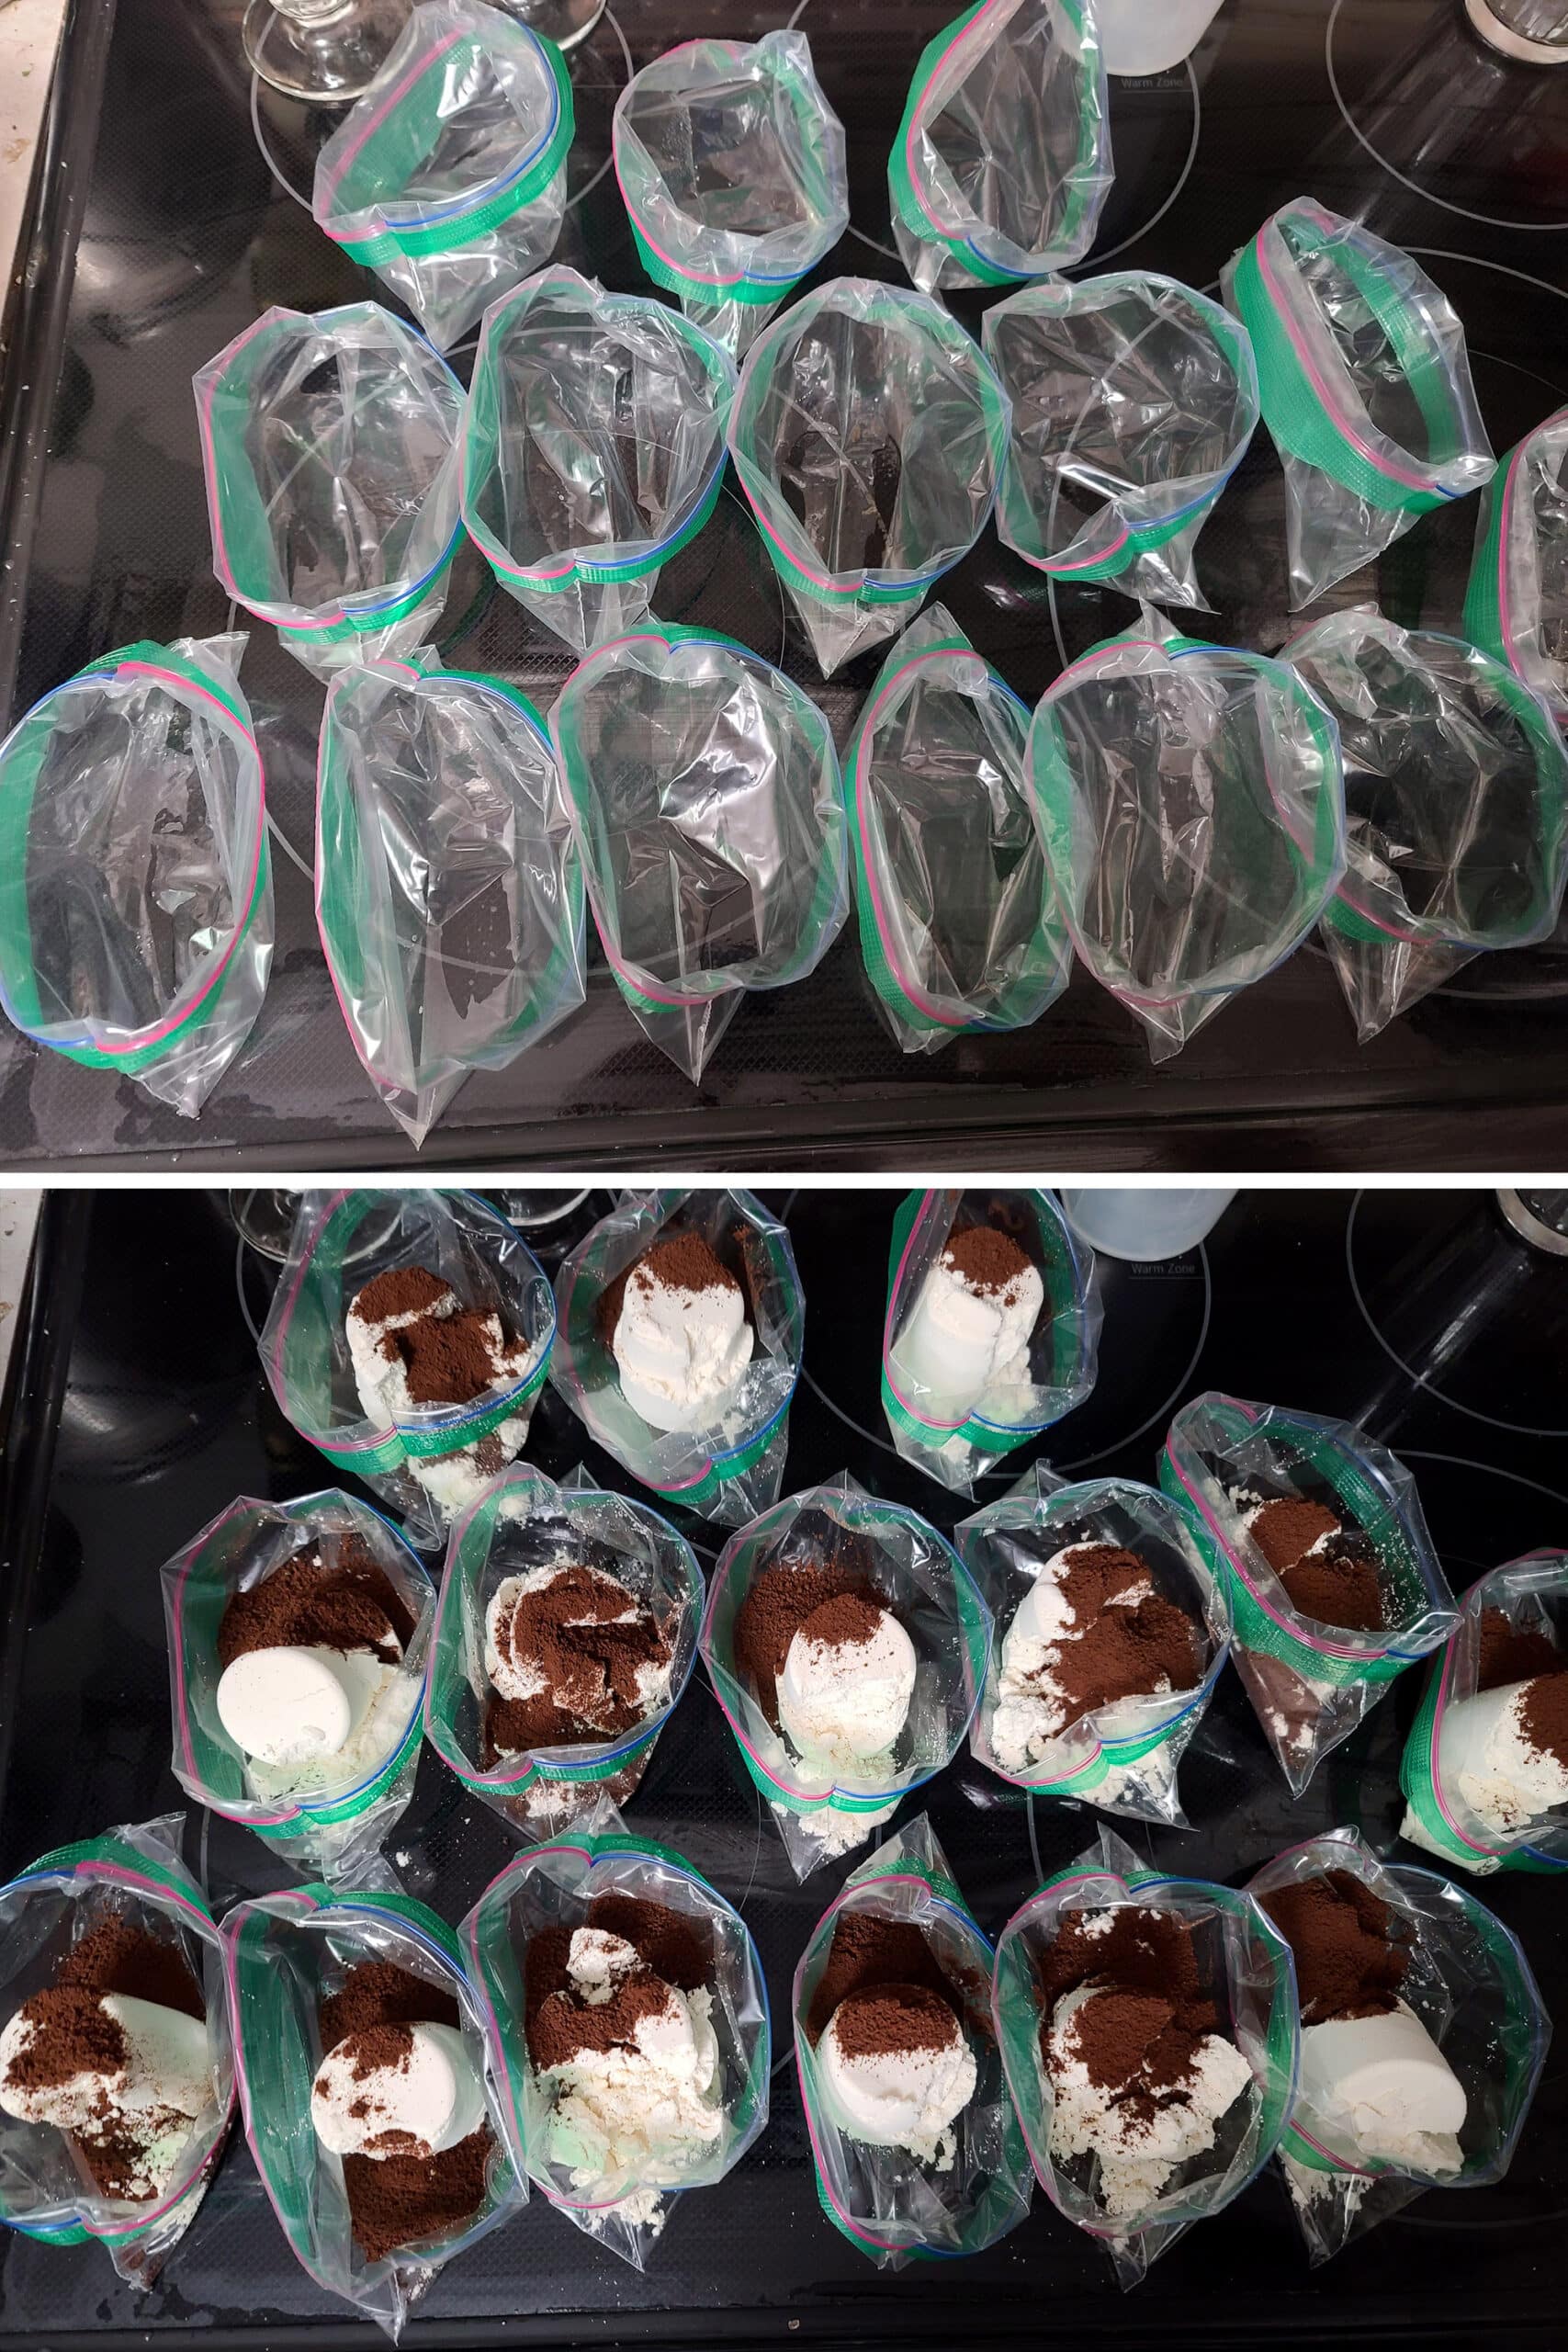 A 2 part image showing 10 small plastic baggies being filled with protein iced coffee dry ingredients.